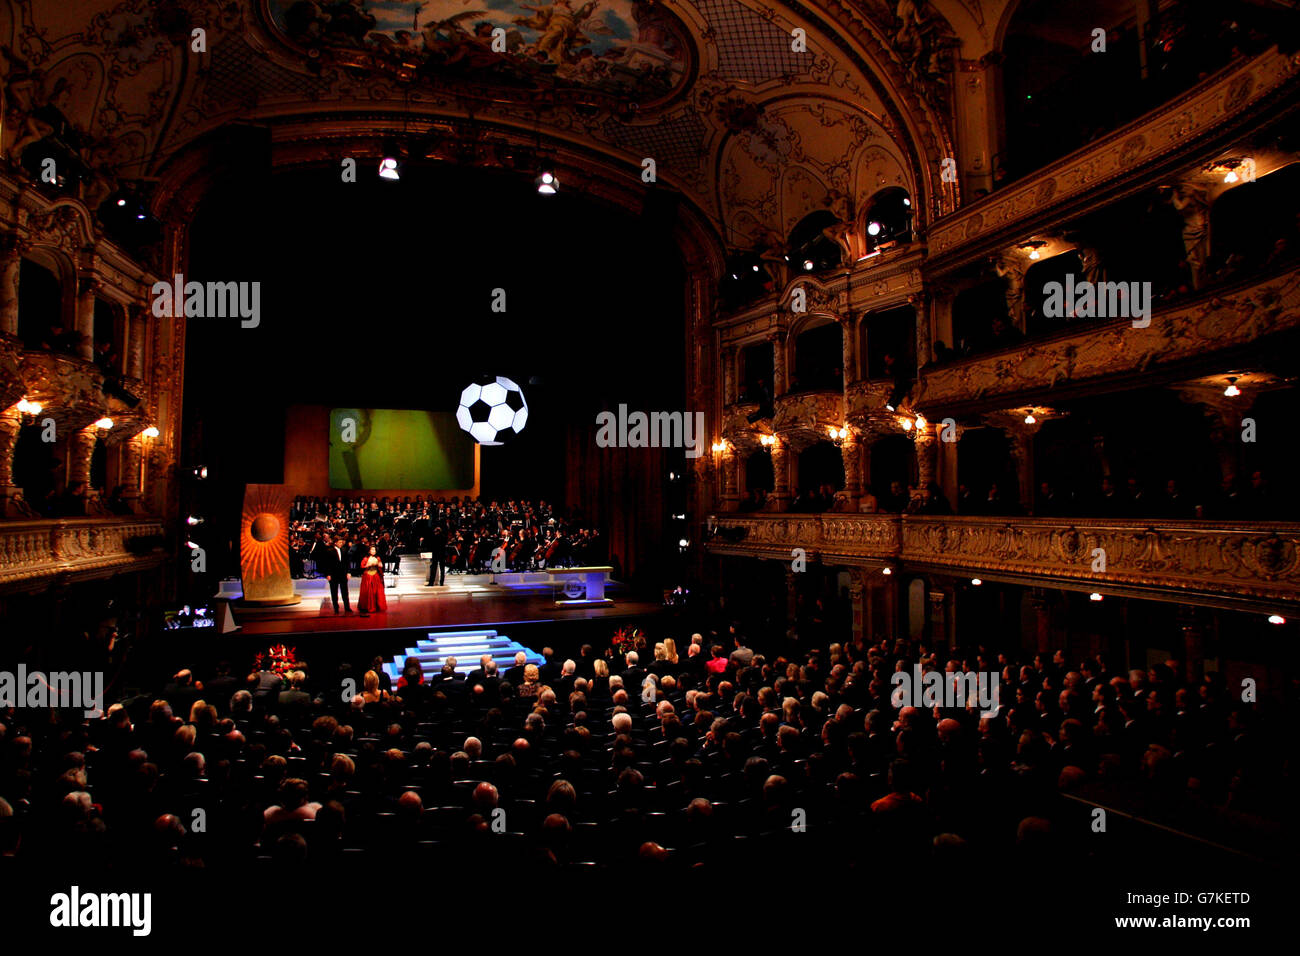 Venue for the FIFA World Player of the Year Gala, the Zurich Opera House Stock Photo